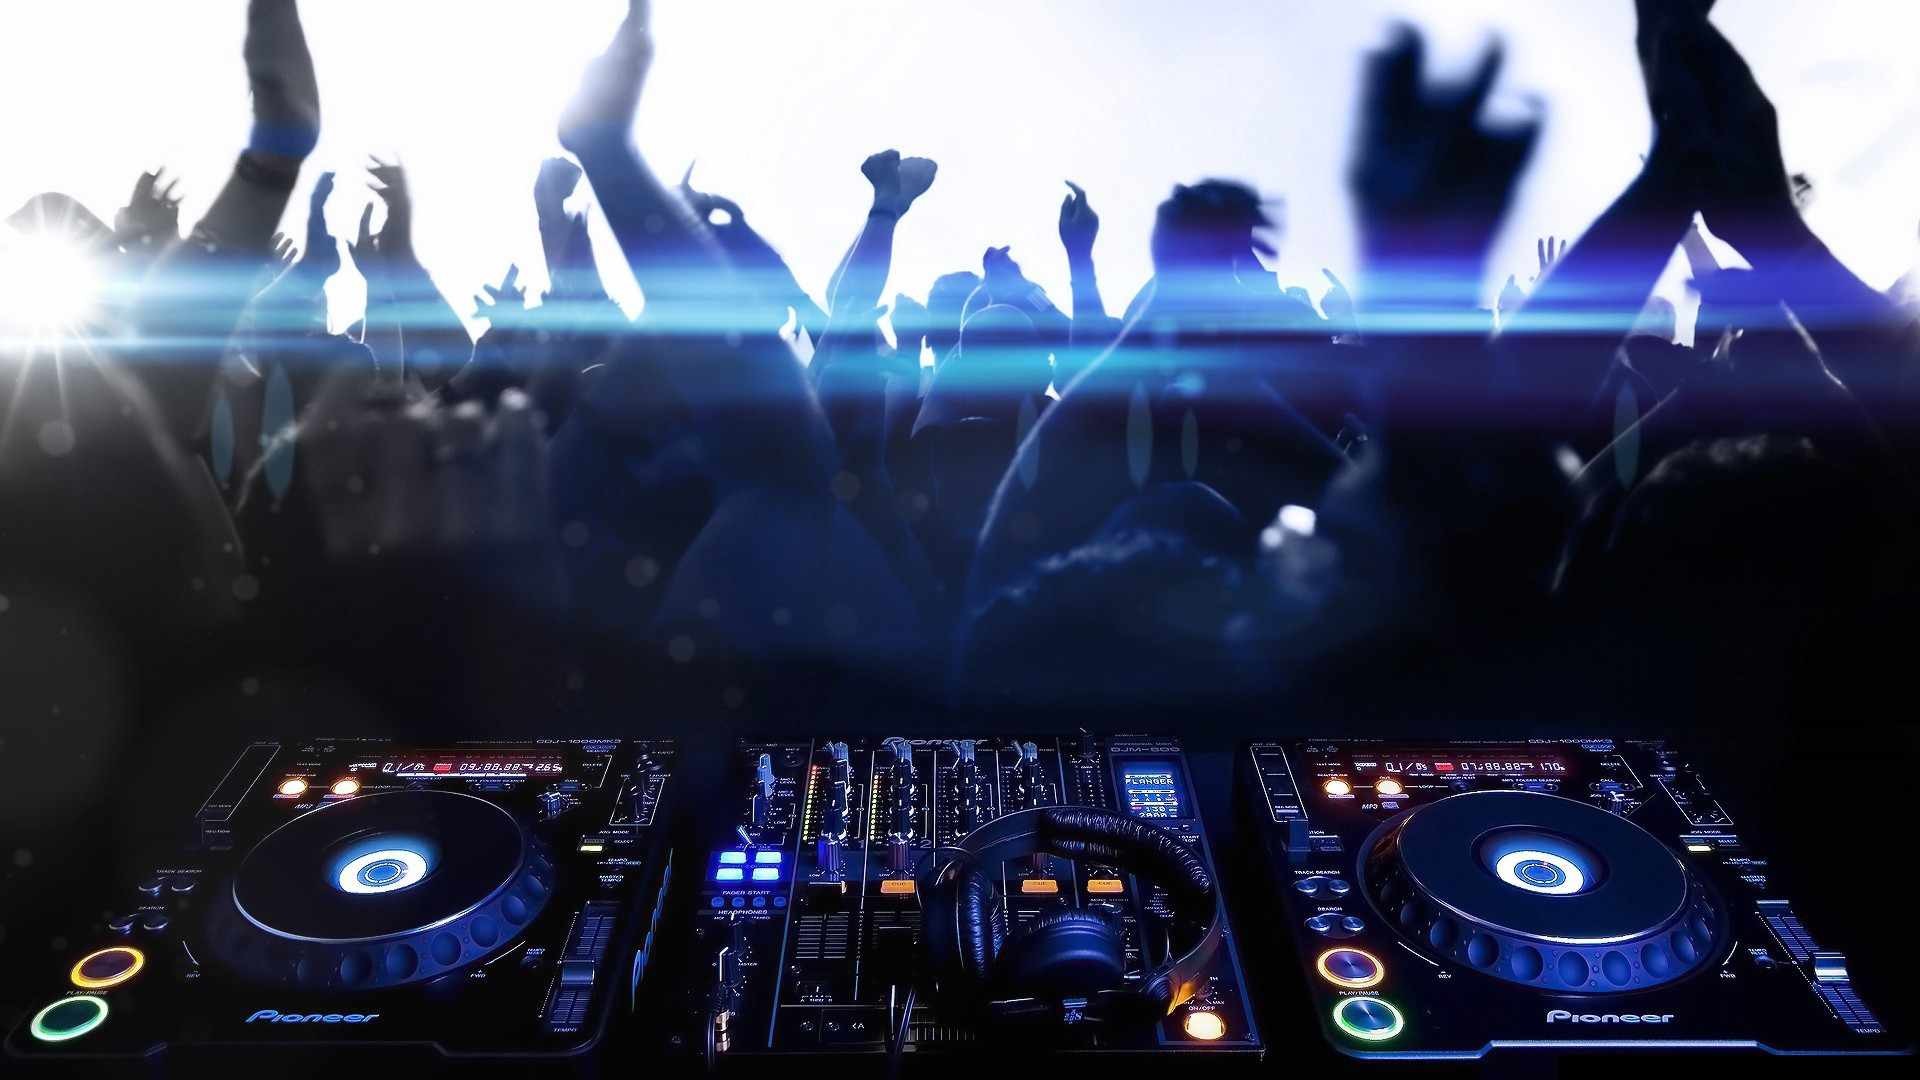 1920x1080 Rave Wallpaper Tumblr | Top HD Images For Free